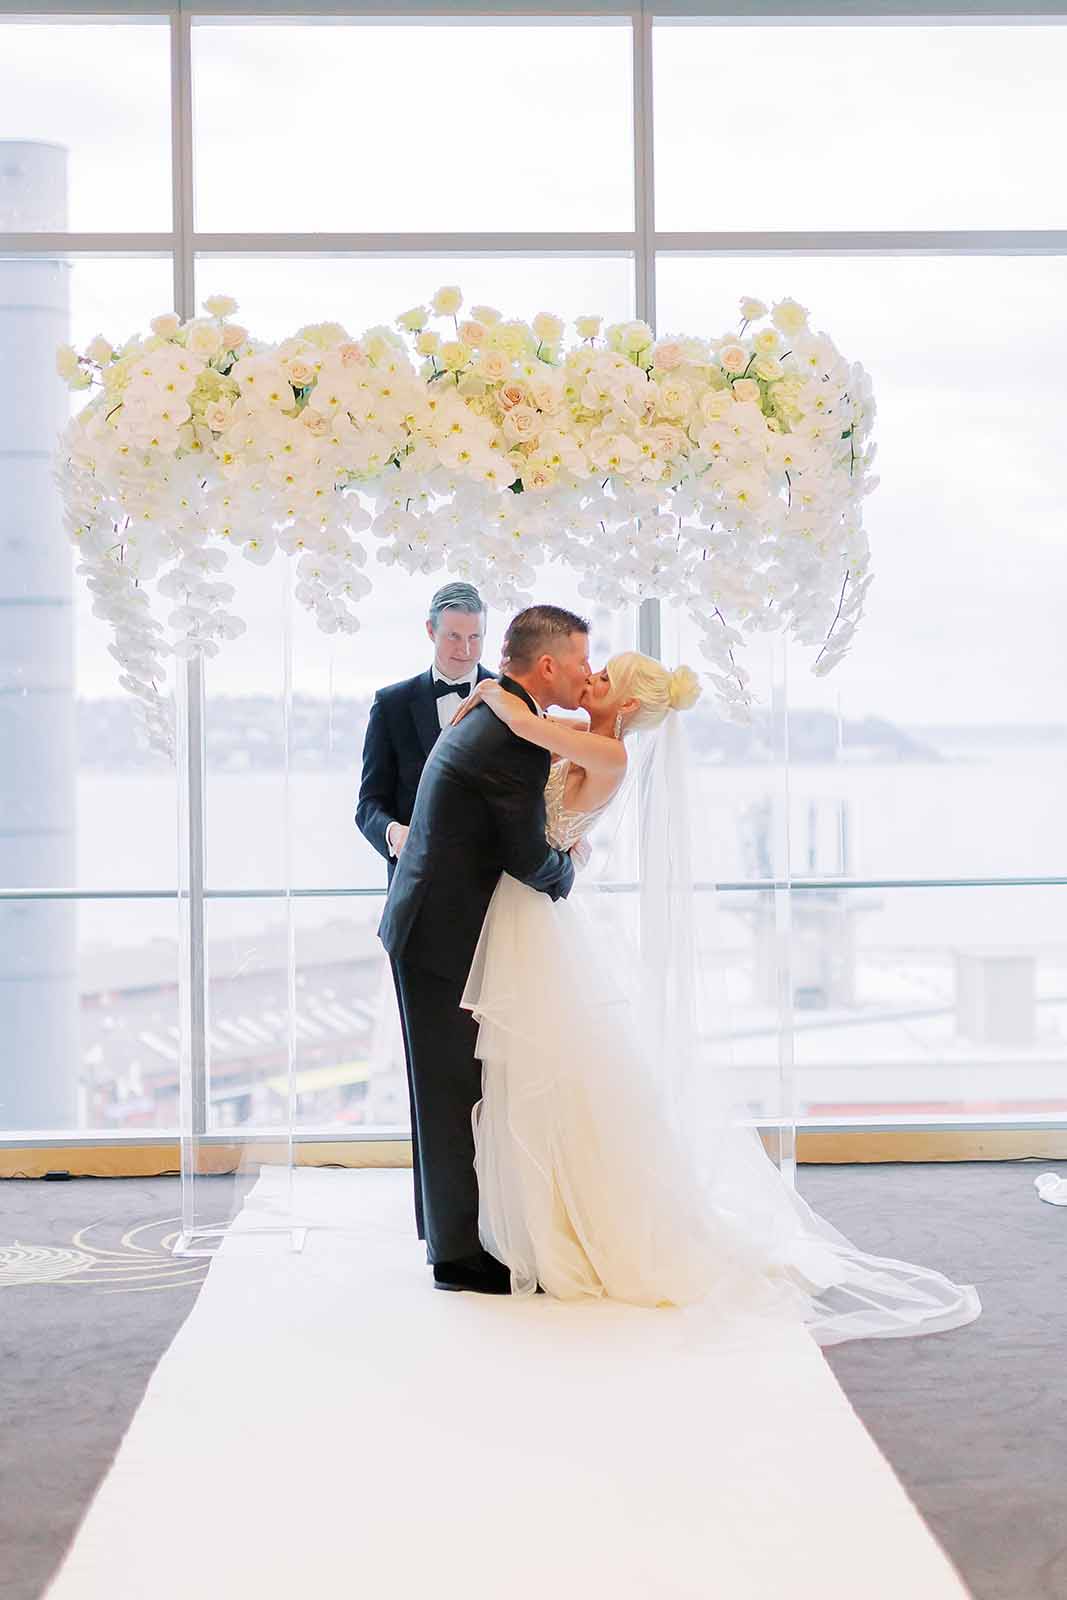 Bride and Groom kissing in front of a white floral arch covered in orchids during their formal ballroom wedding ceremony